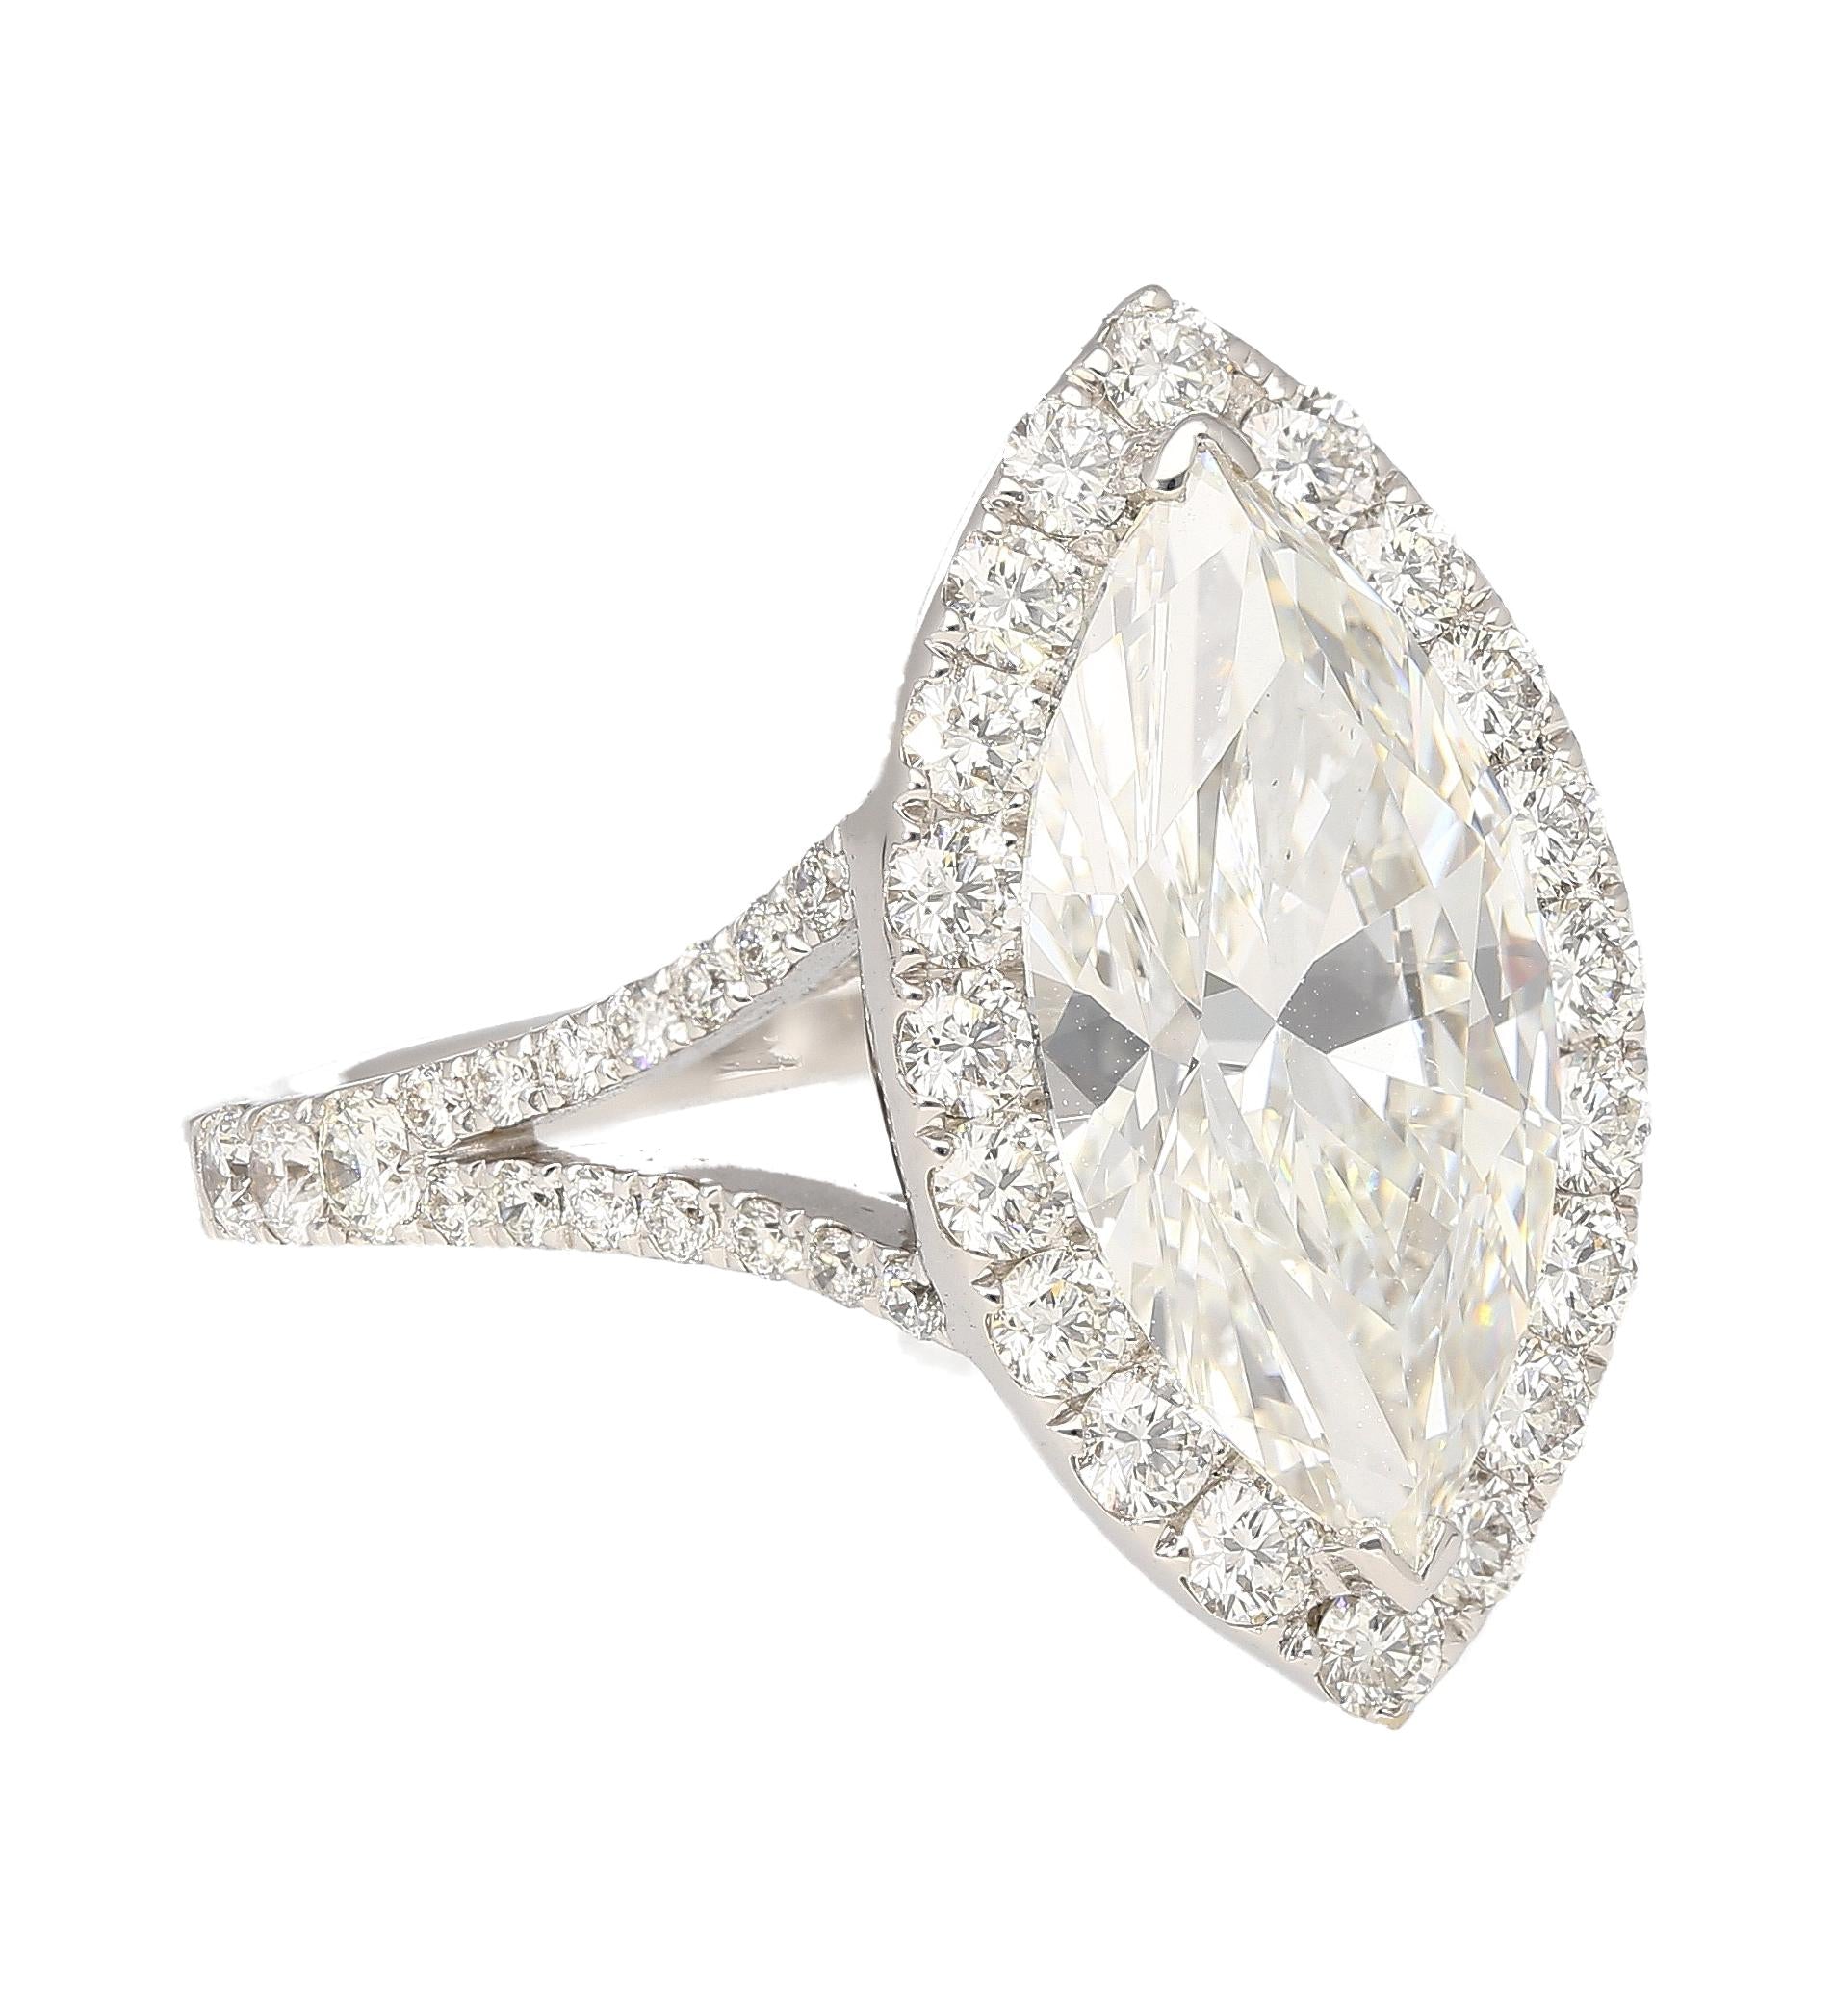 3.22 Carat Marquise Cut G VS1 GIA Certified Diamond Halo Pave 18K Ring